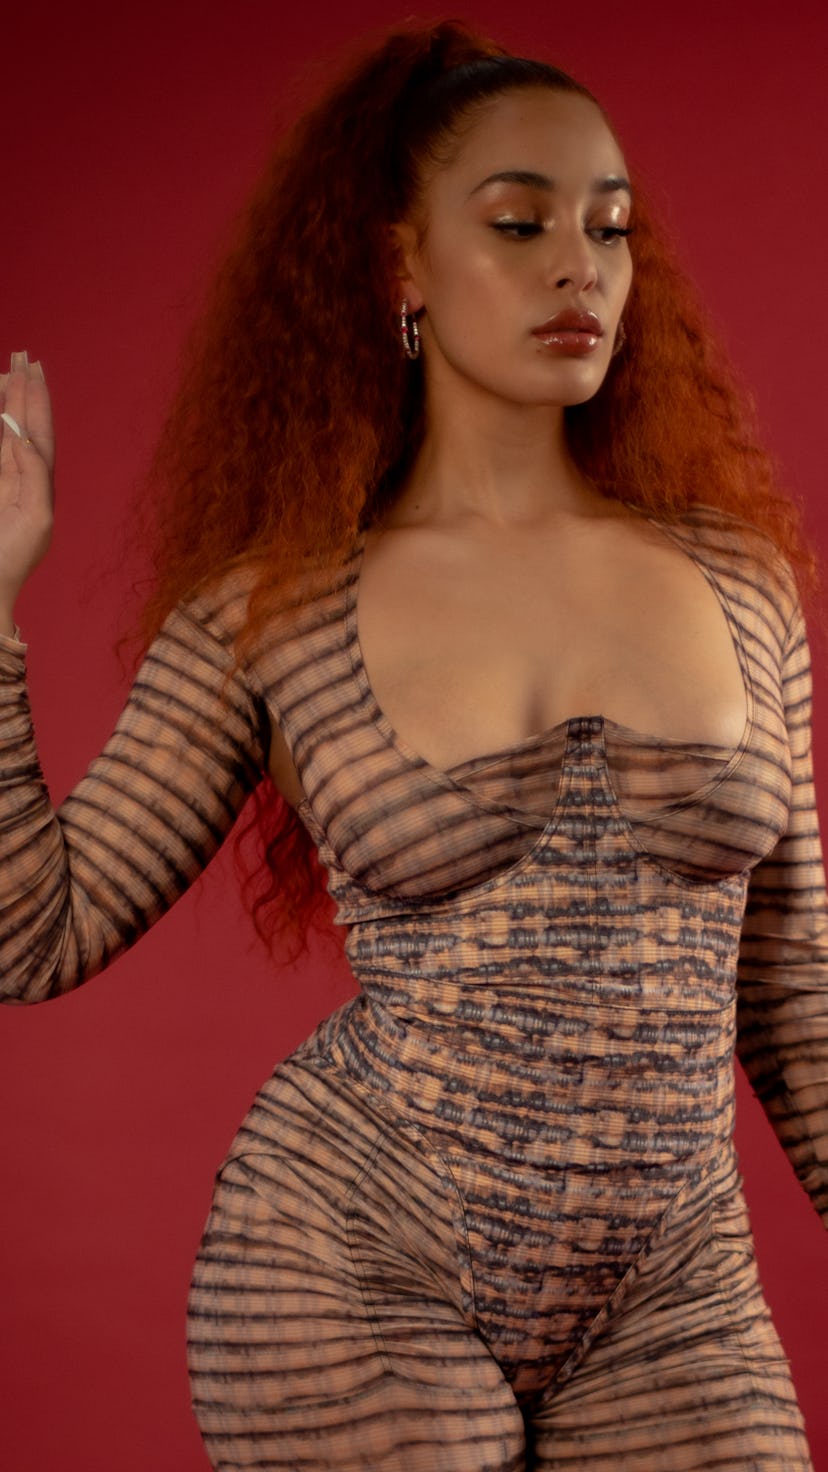 A photo of Jorja Smith. She's wearing a striped cat suit, and stands against a red background. Her e...